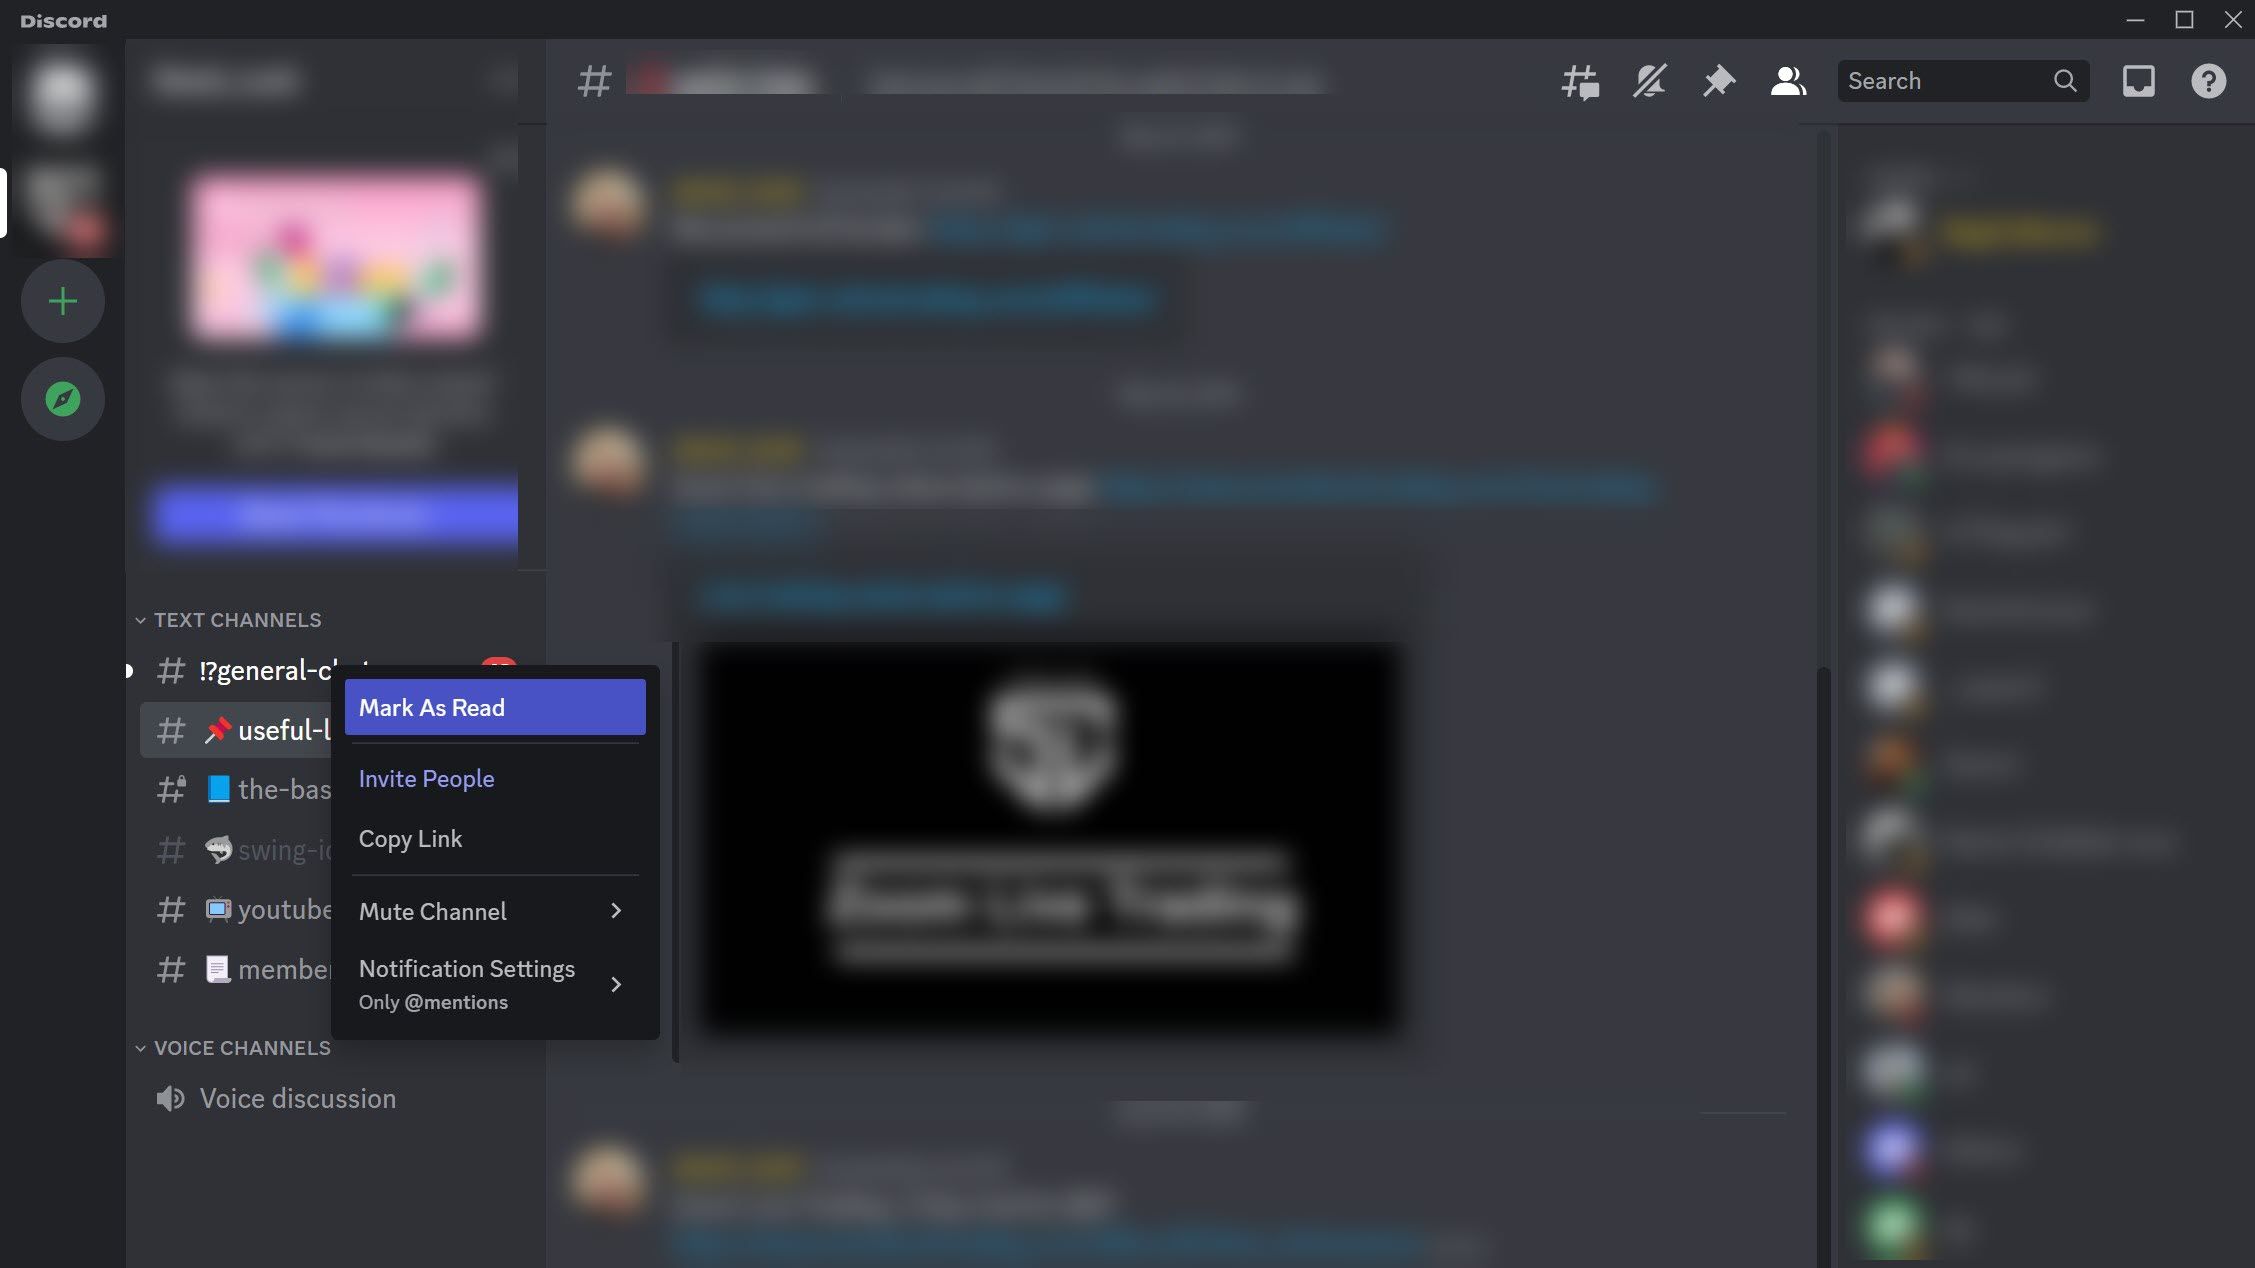 Clicking on the Mark As Read to Auto Read the Stuck Messages in the Discord App